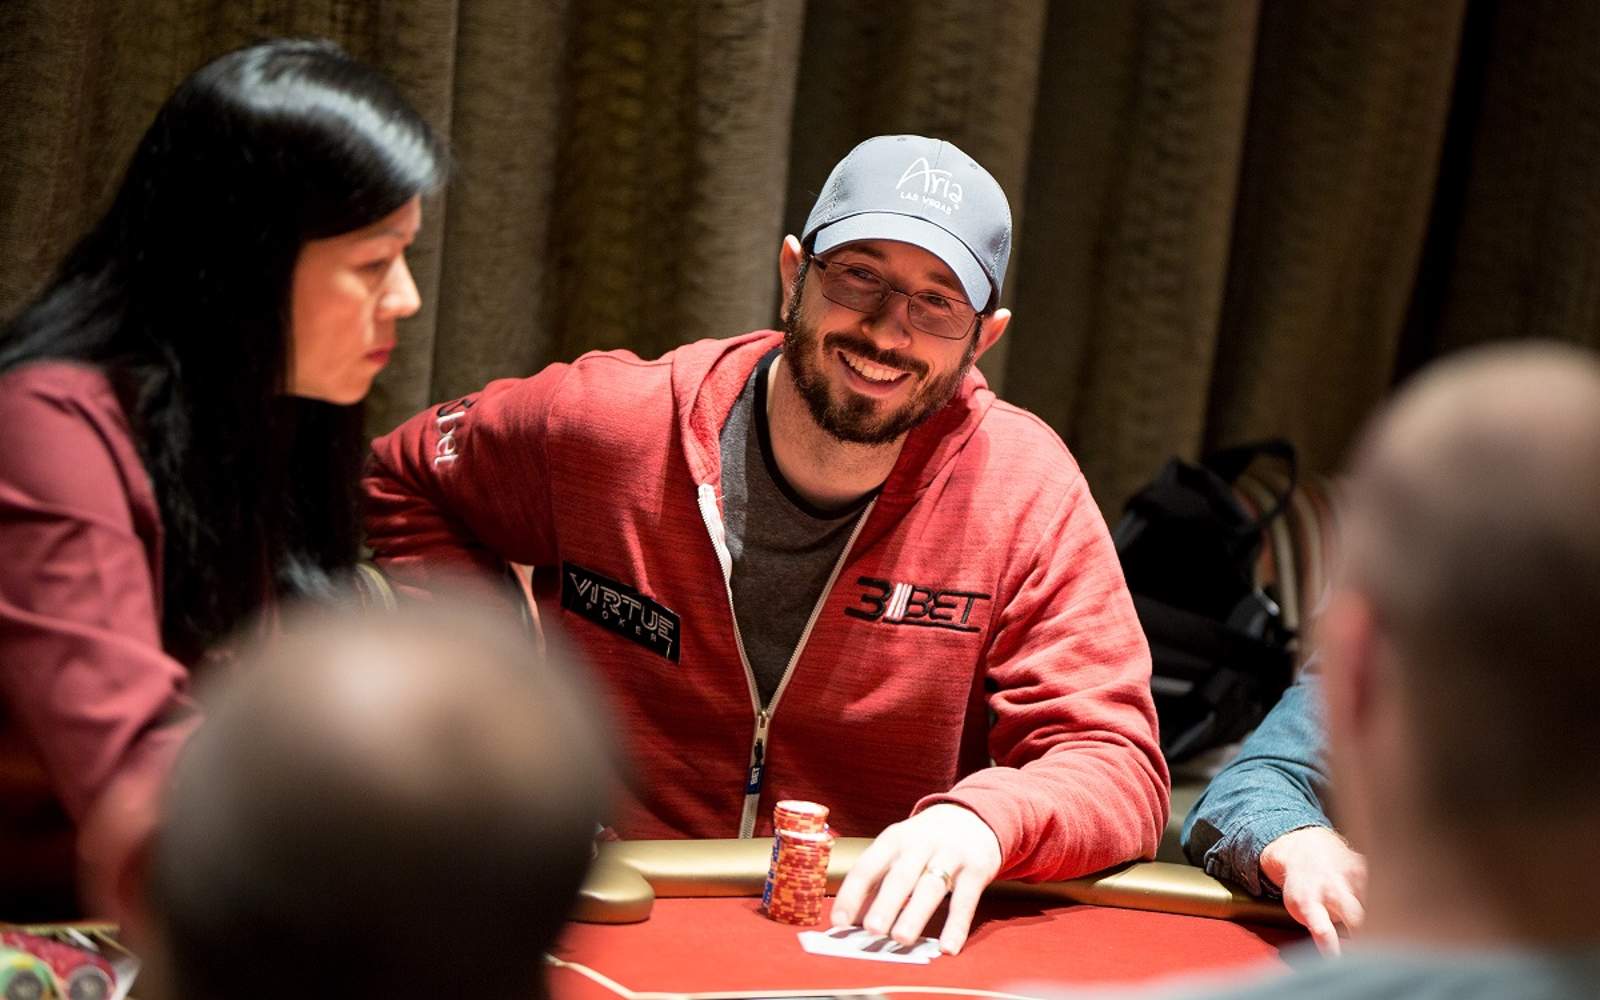 Brian Rast Leads Day 2 of Poker Masters Championship